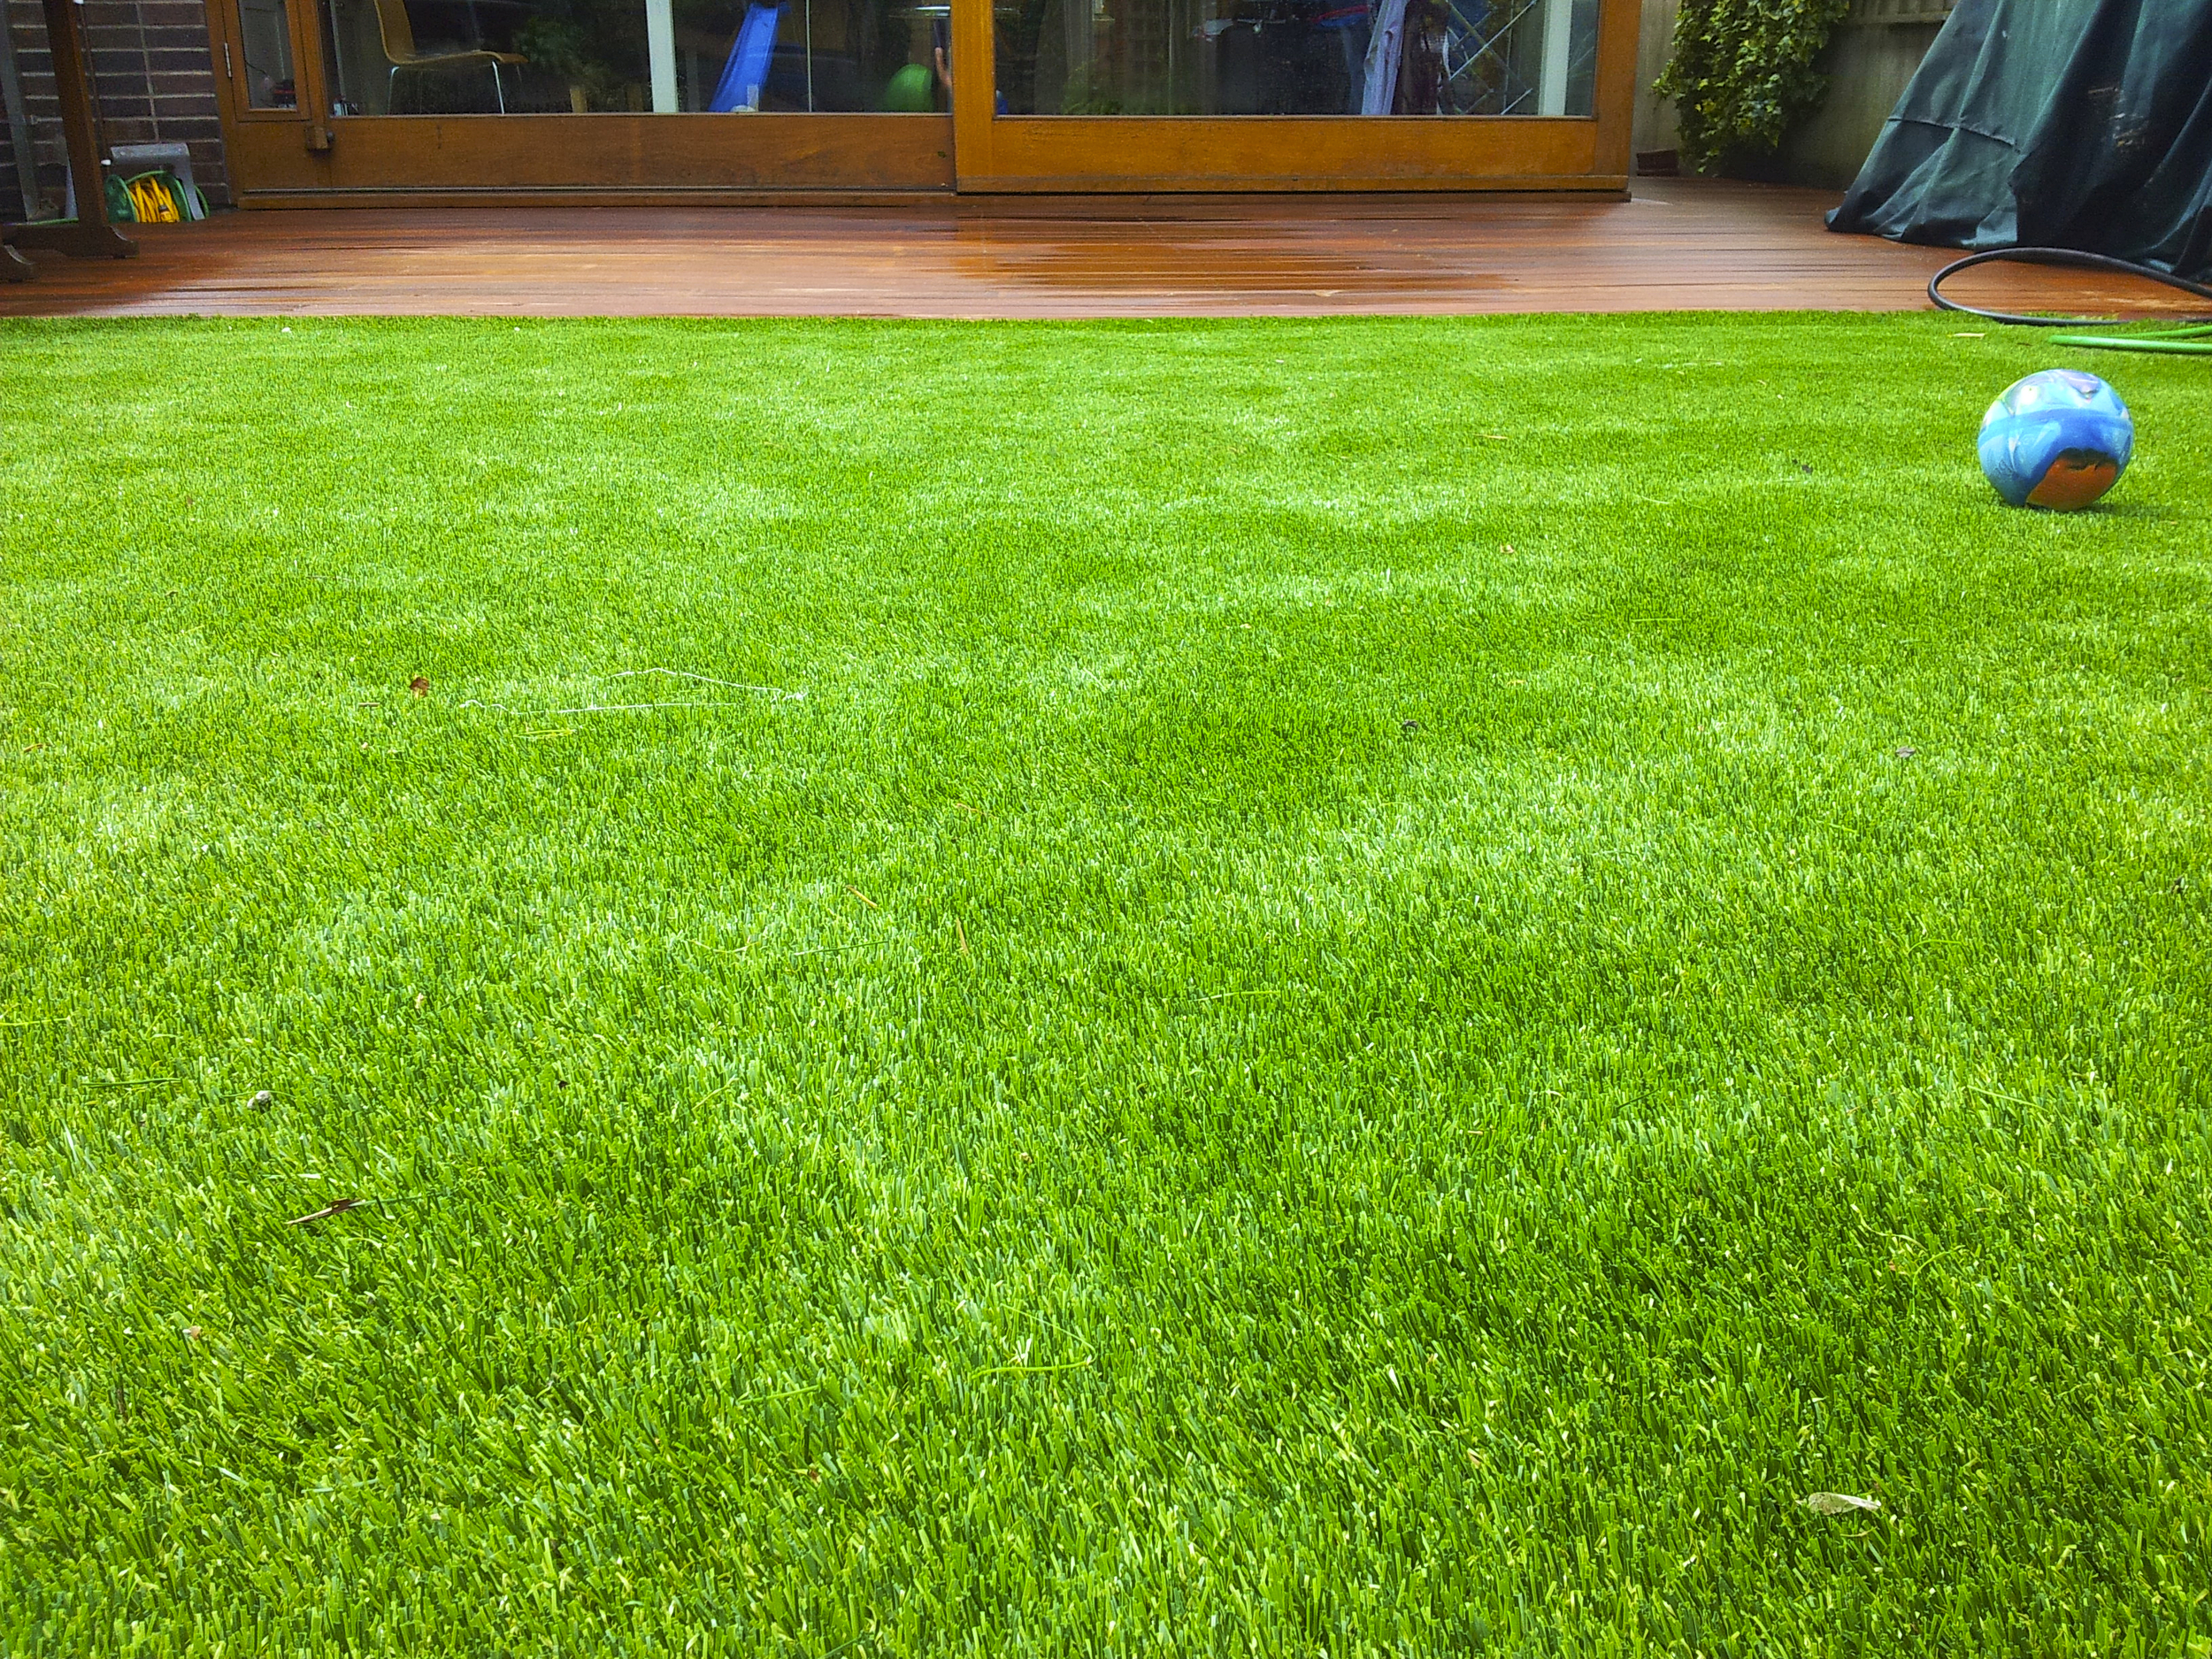 TigerTurf lawn and Decking